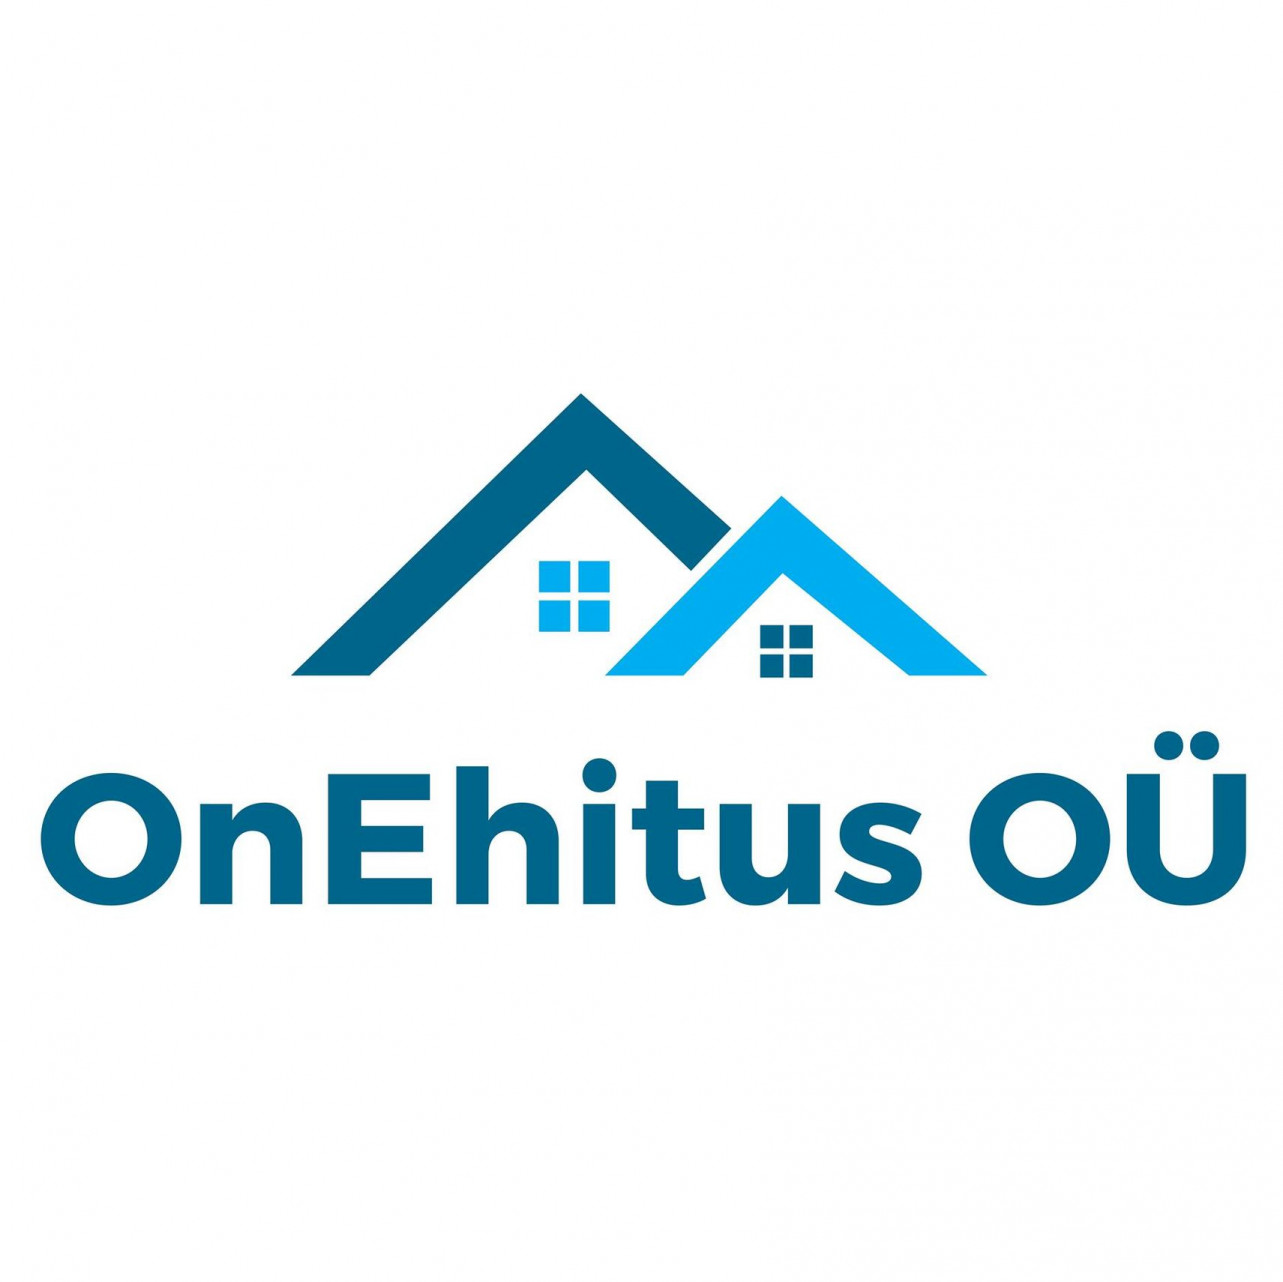 ONEHITUS OÜ - Construction of residential and non-residential buildings in Tapa